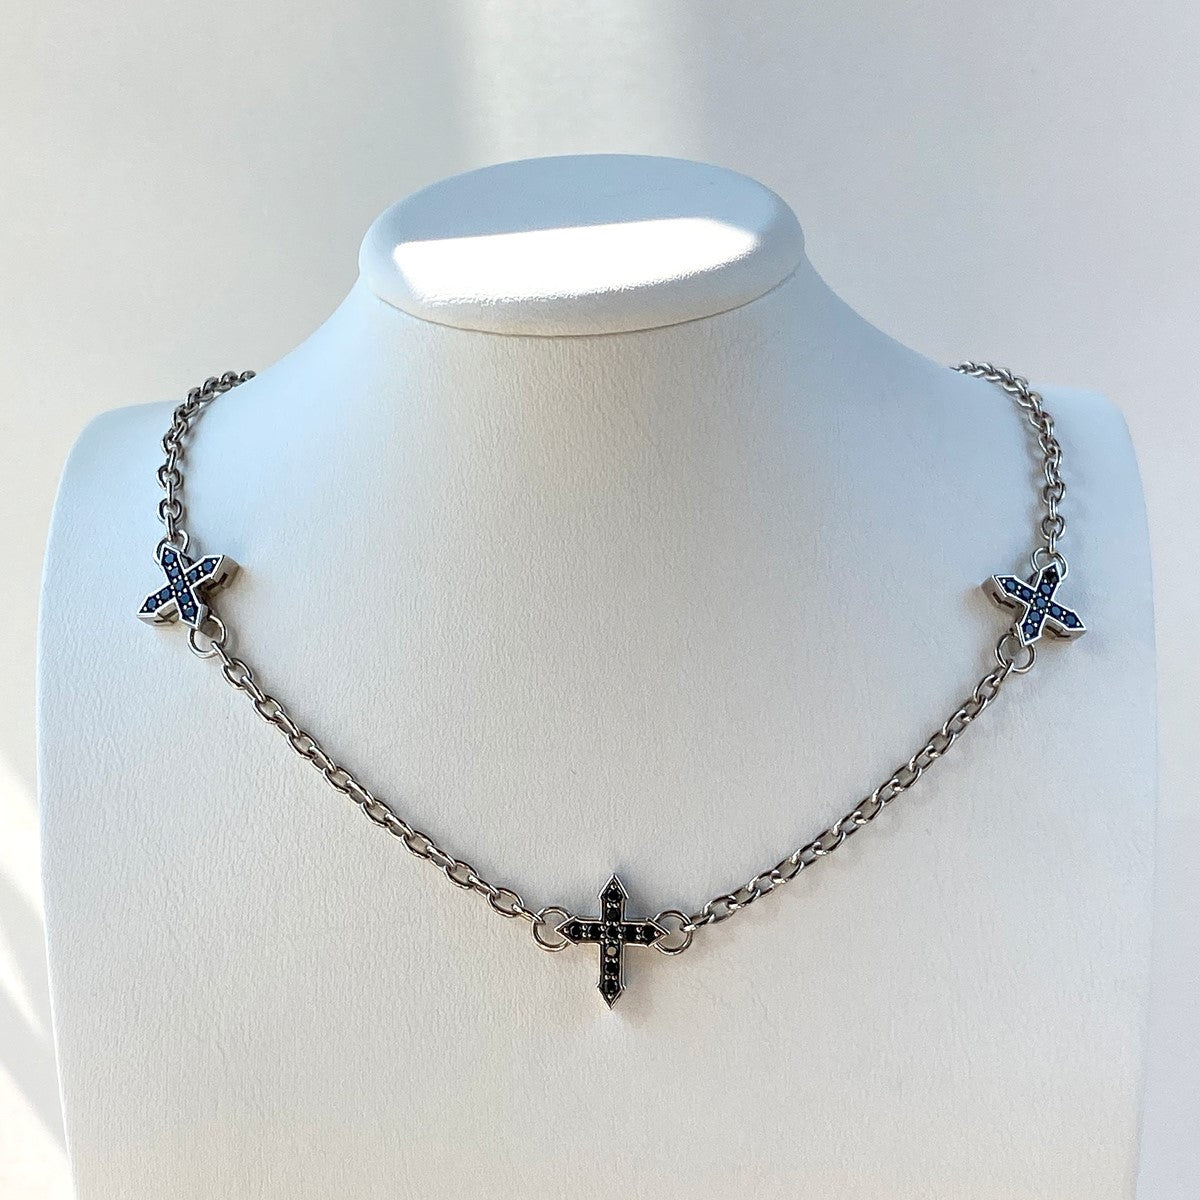 NECKLACE "TRINITY "GLOW" WITH BLACK SPINEL / SILVER